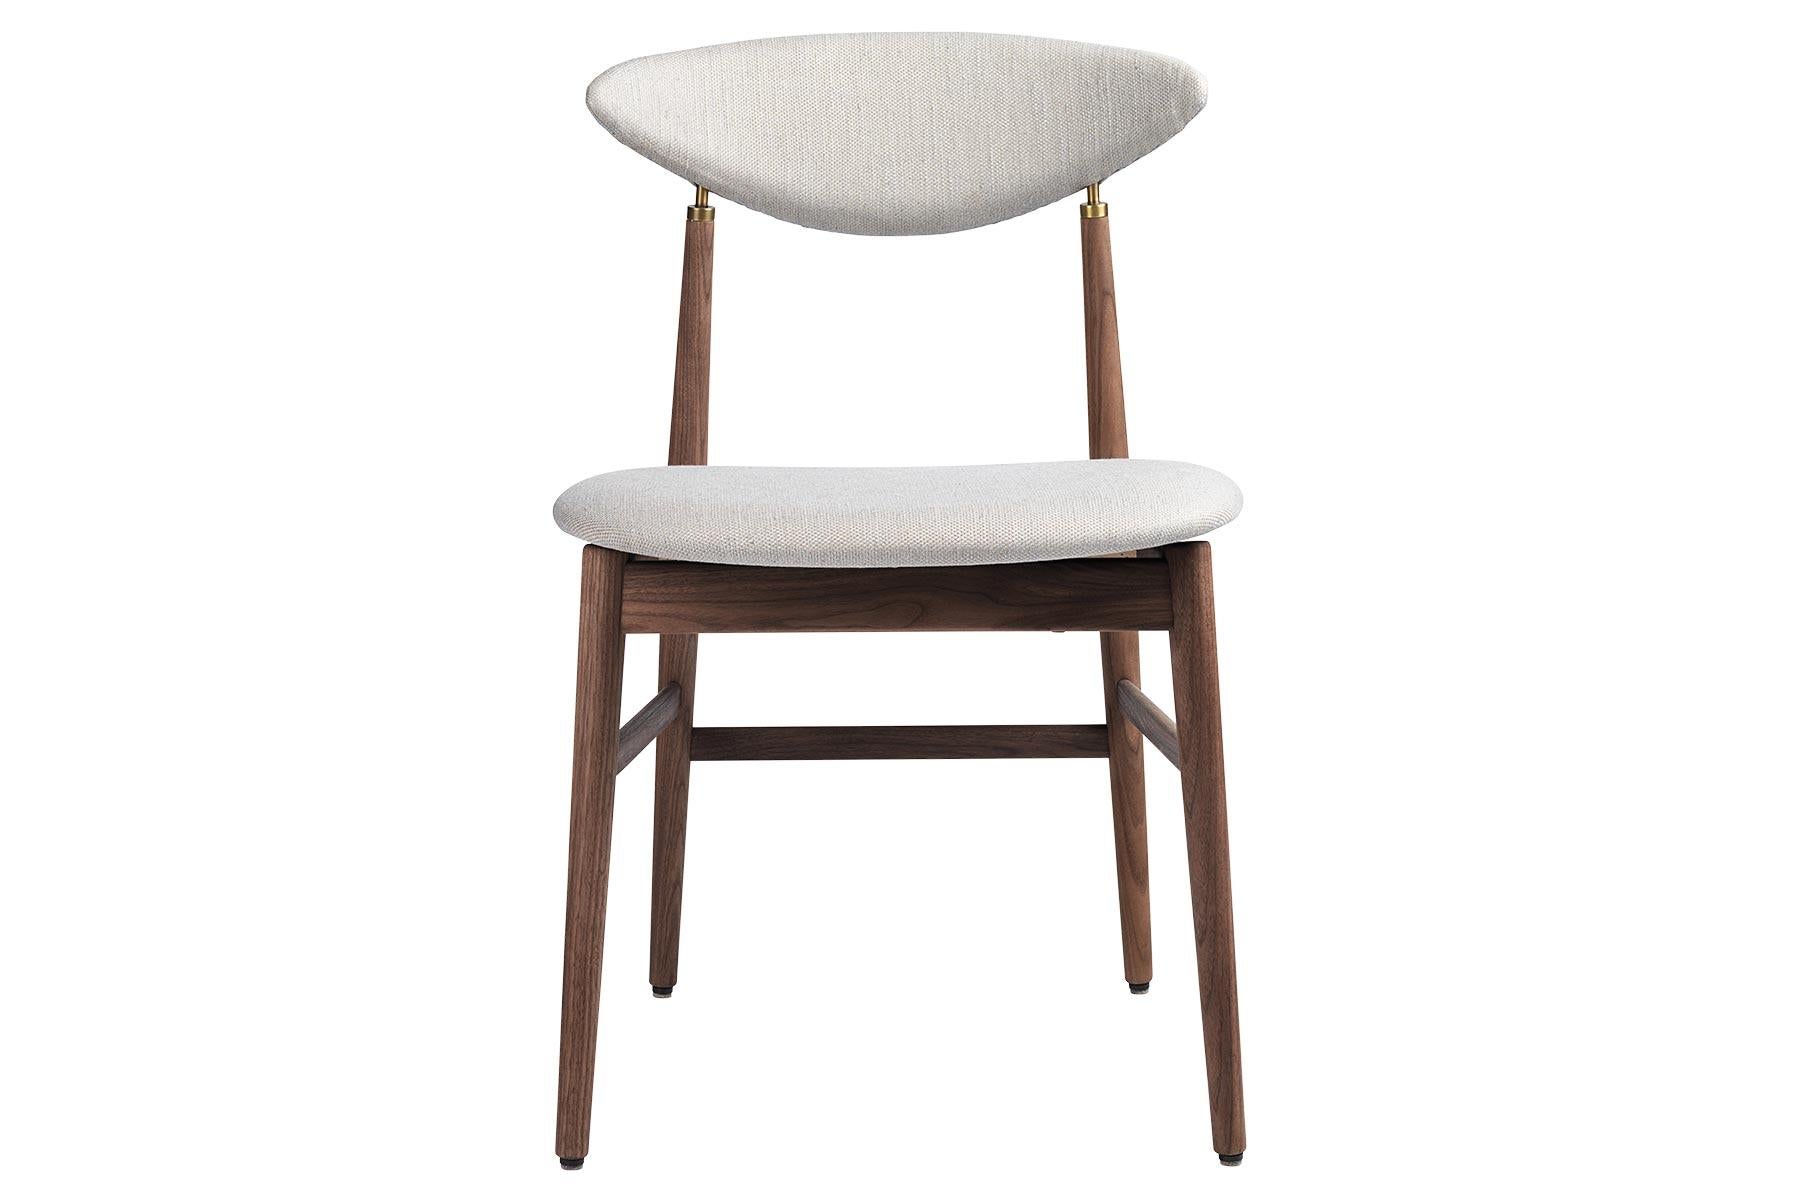 Designed by the design duo GamFratesi, the Gent dining chair is characterised by the contradiction between Scandinavian elegance and Italian dynamic lines. Strongly connected to the Masculo chair, the new Gent dining chair is characterised by a